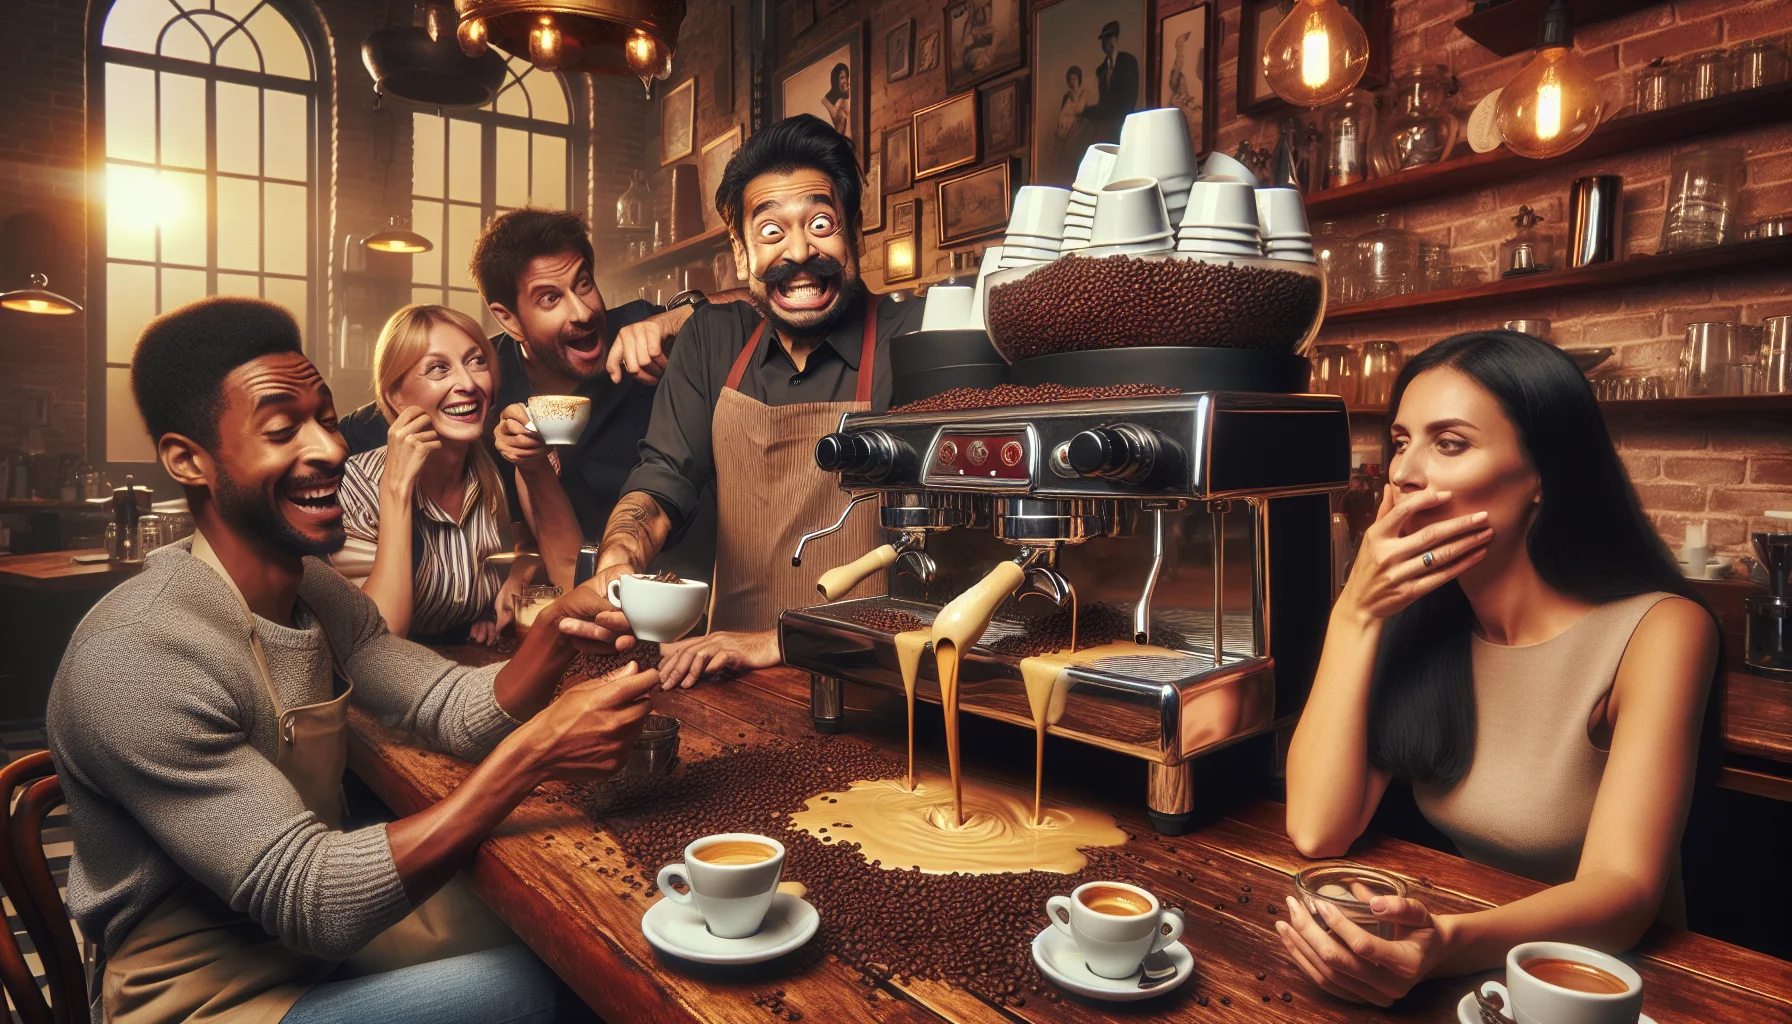 Picture a humorous scene set in a lively café. One end of the café, a South Asian male barista, with an impish grin, uses a large espresso machine overfilled with coffee beans causing a comical overflow of espresso. Three customers; a Caucasian woman, a Middle-Eastern man and a Black woman, all amused, watch the spectacle while cradling their own beautifully decorated espresso cups. Include warm, inviting tones; ambient lighting reflects off polished wood tables and vintage décor, reinforcing the café's homely atmosphere. Use the image to subtly convey the inviting allure of the espresso culture.